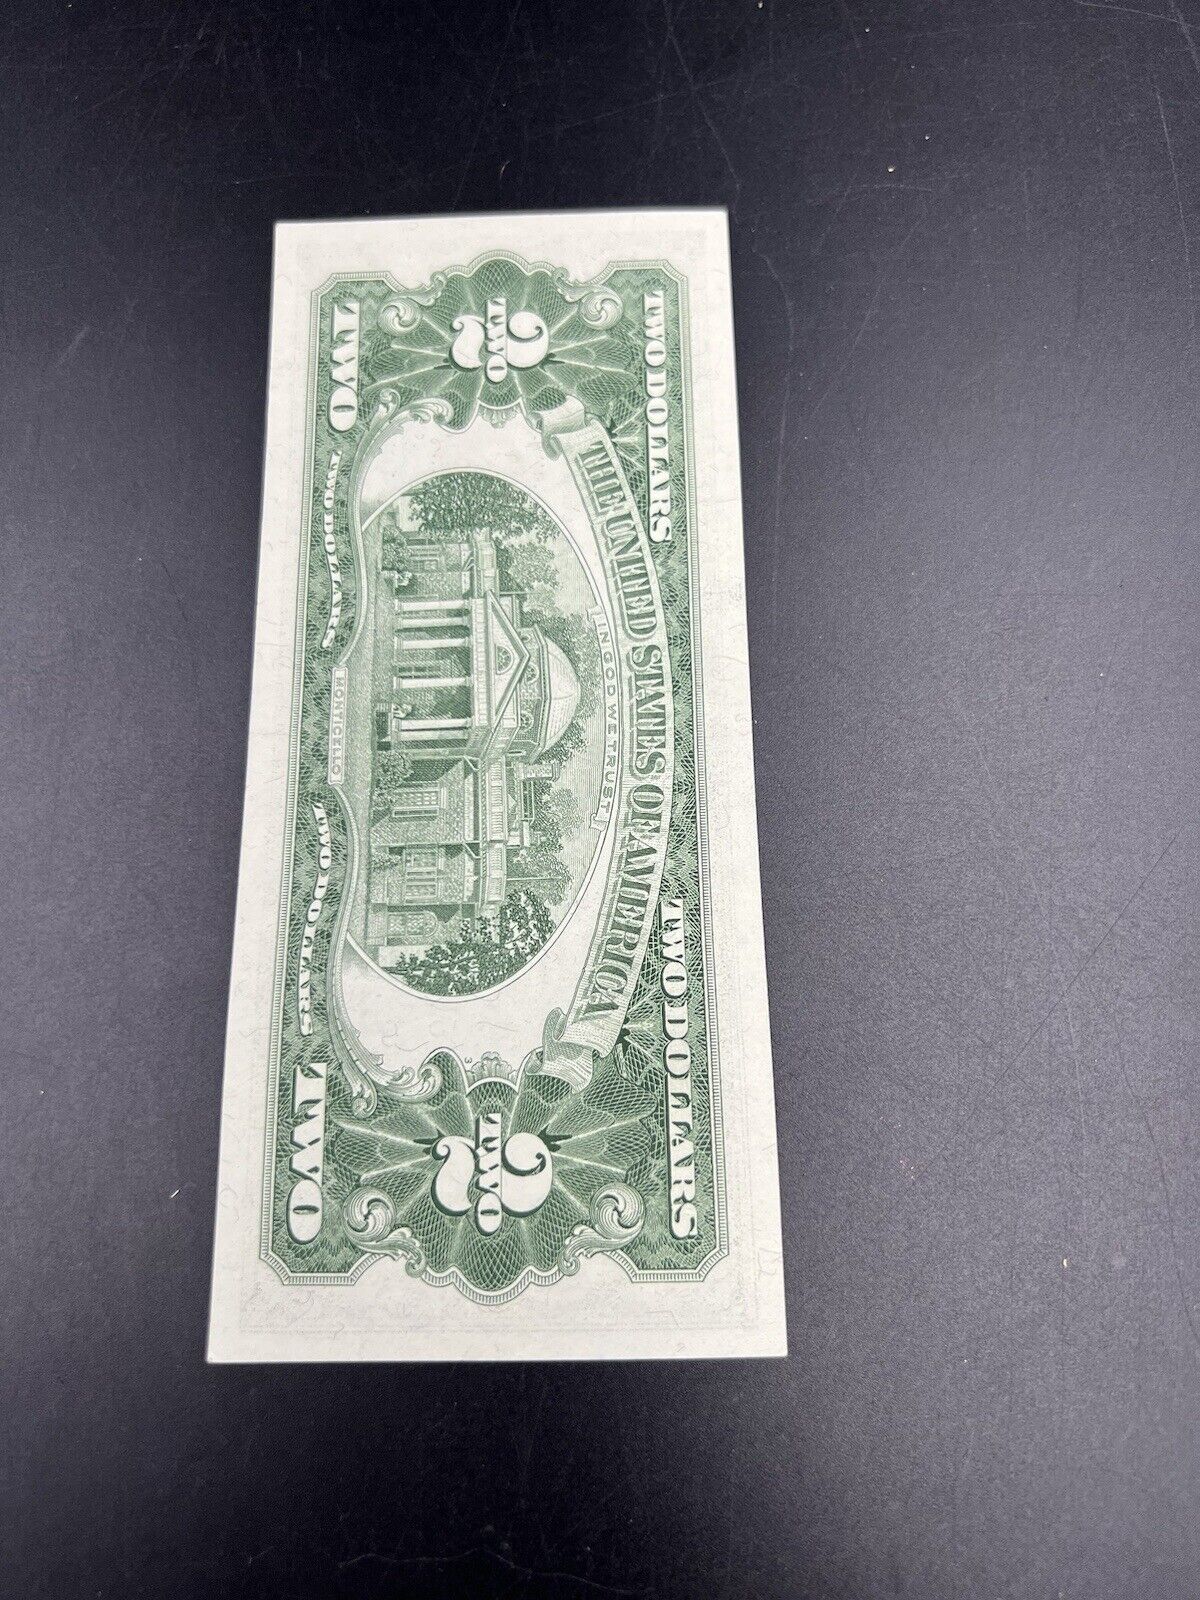 1963 $2 United States Currency Legal Tender Note Red Seal Choice UNC #738